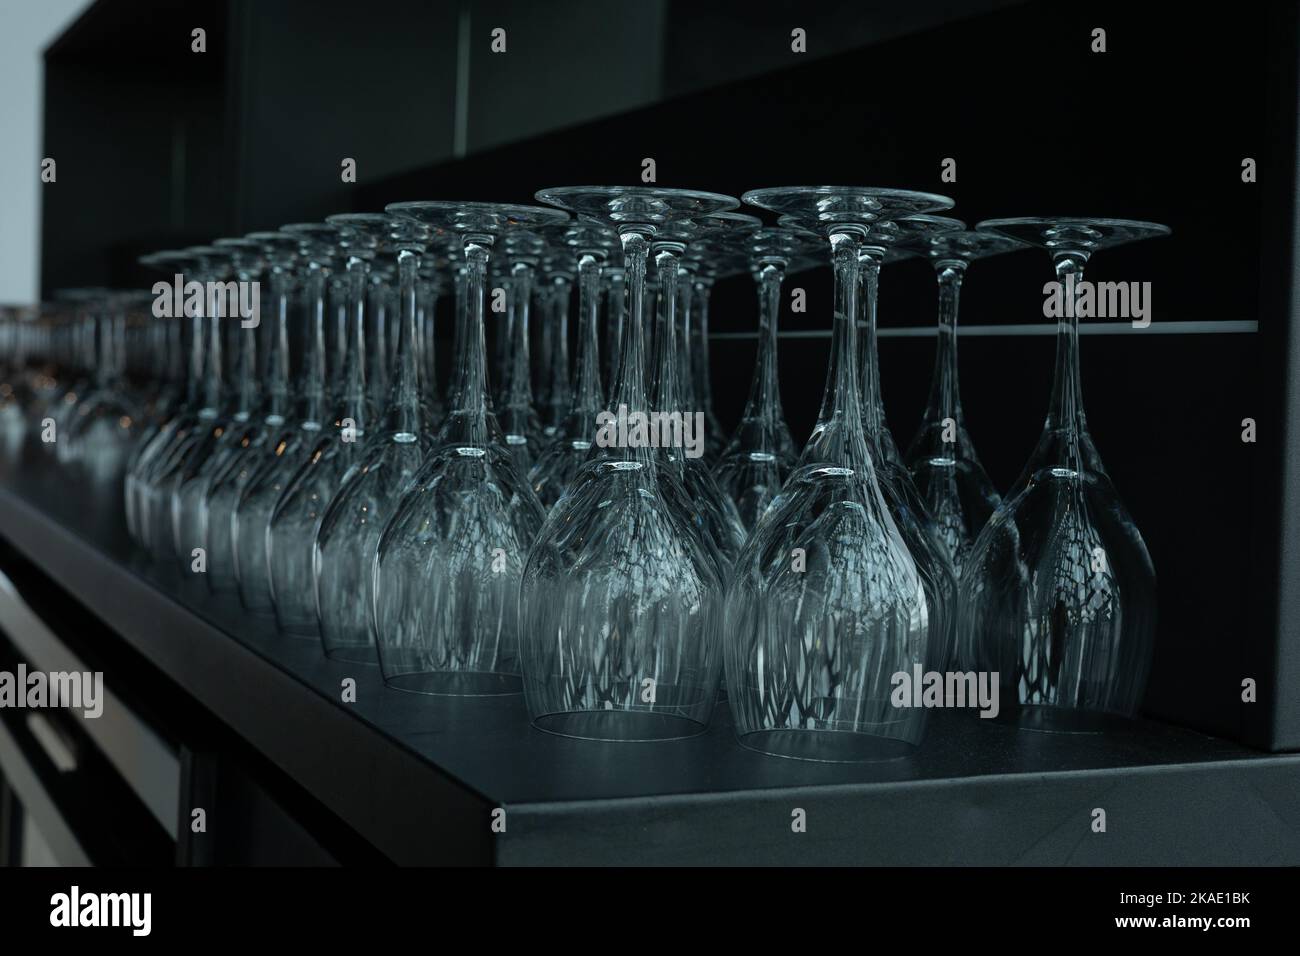 Display of glasses in a cocktail bar Stock Photo - Alamy